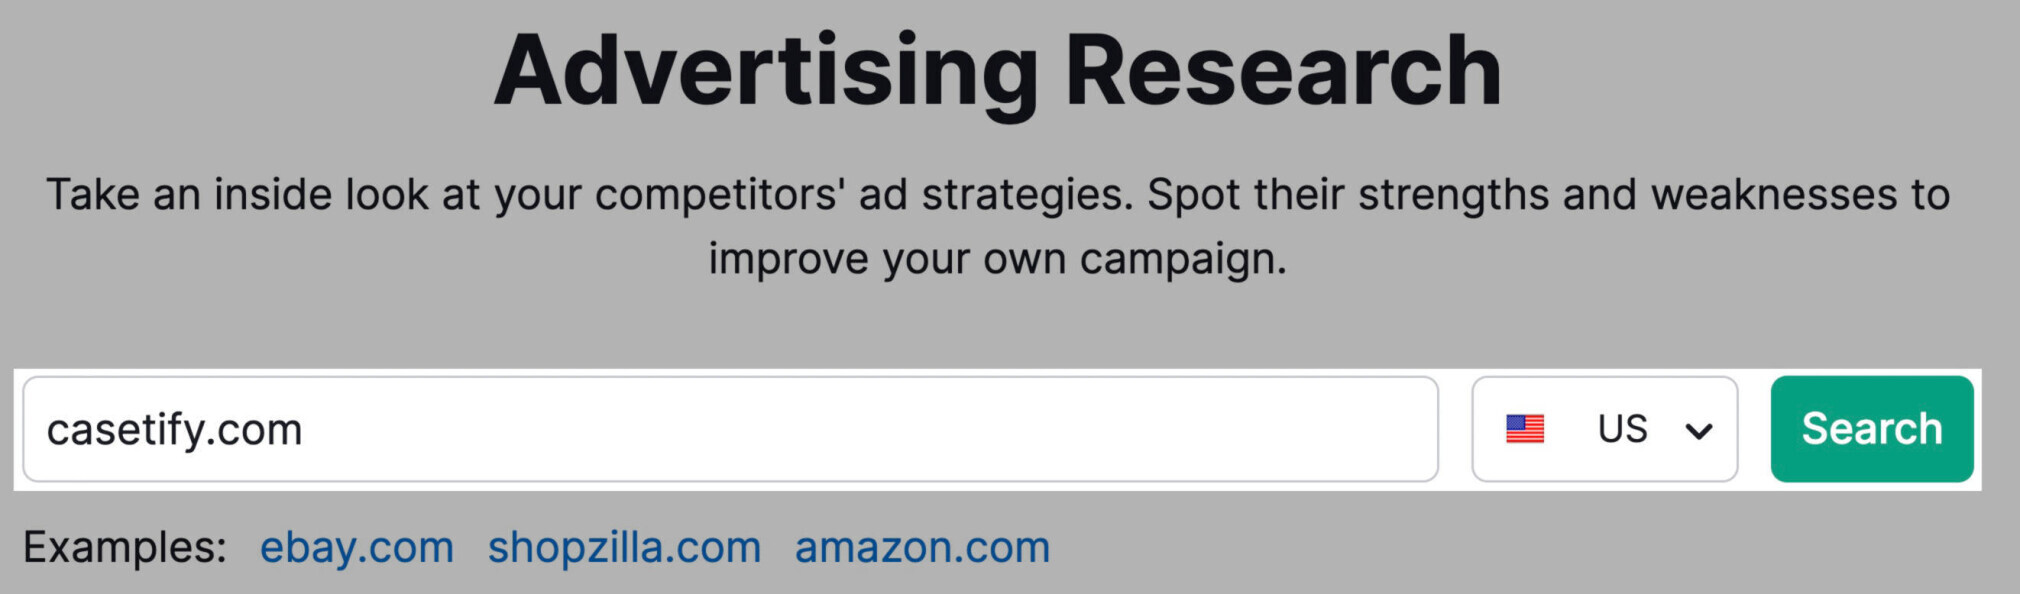 Advertising Research tool